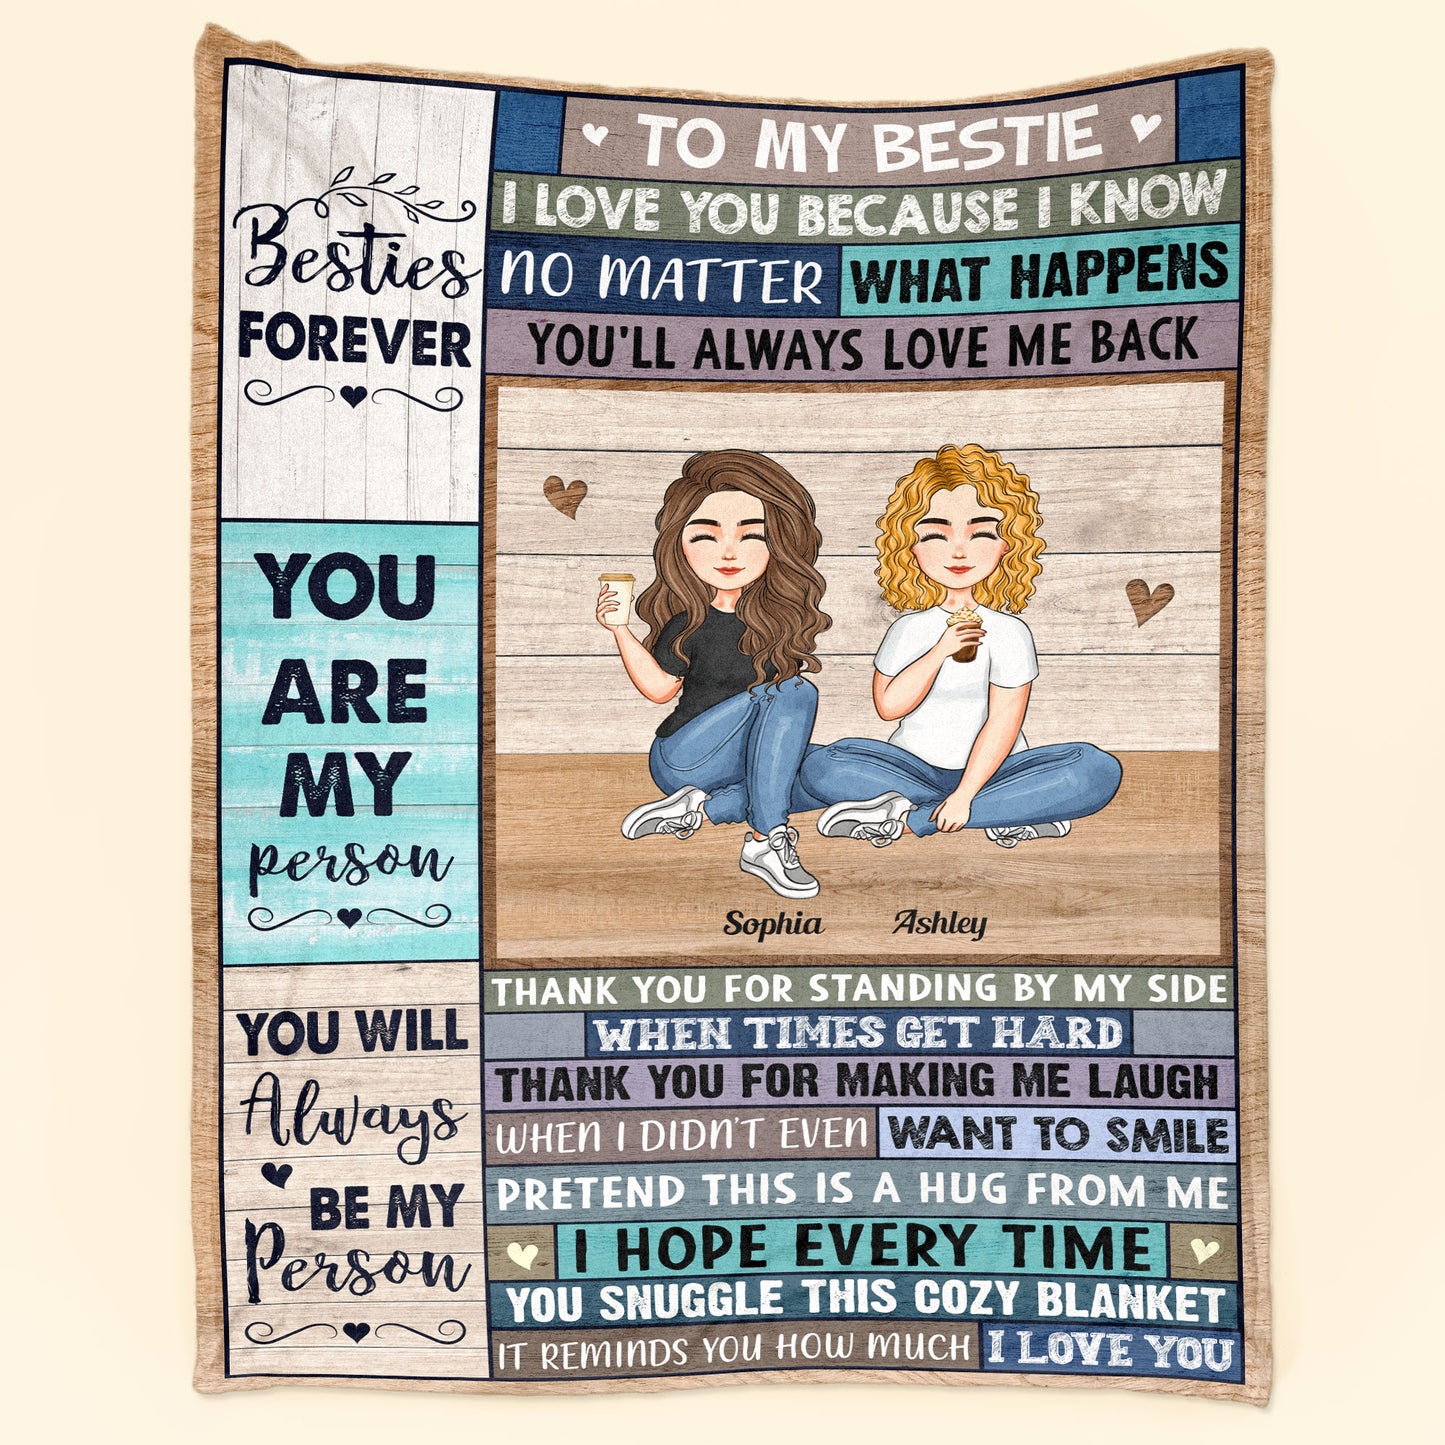 Thank You For Standing By My Side - Personalized Blanket - Birthday, Christmas, New Year Gift For Sisters, Sistas, Besties, Soul Sisters